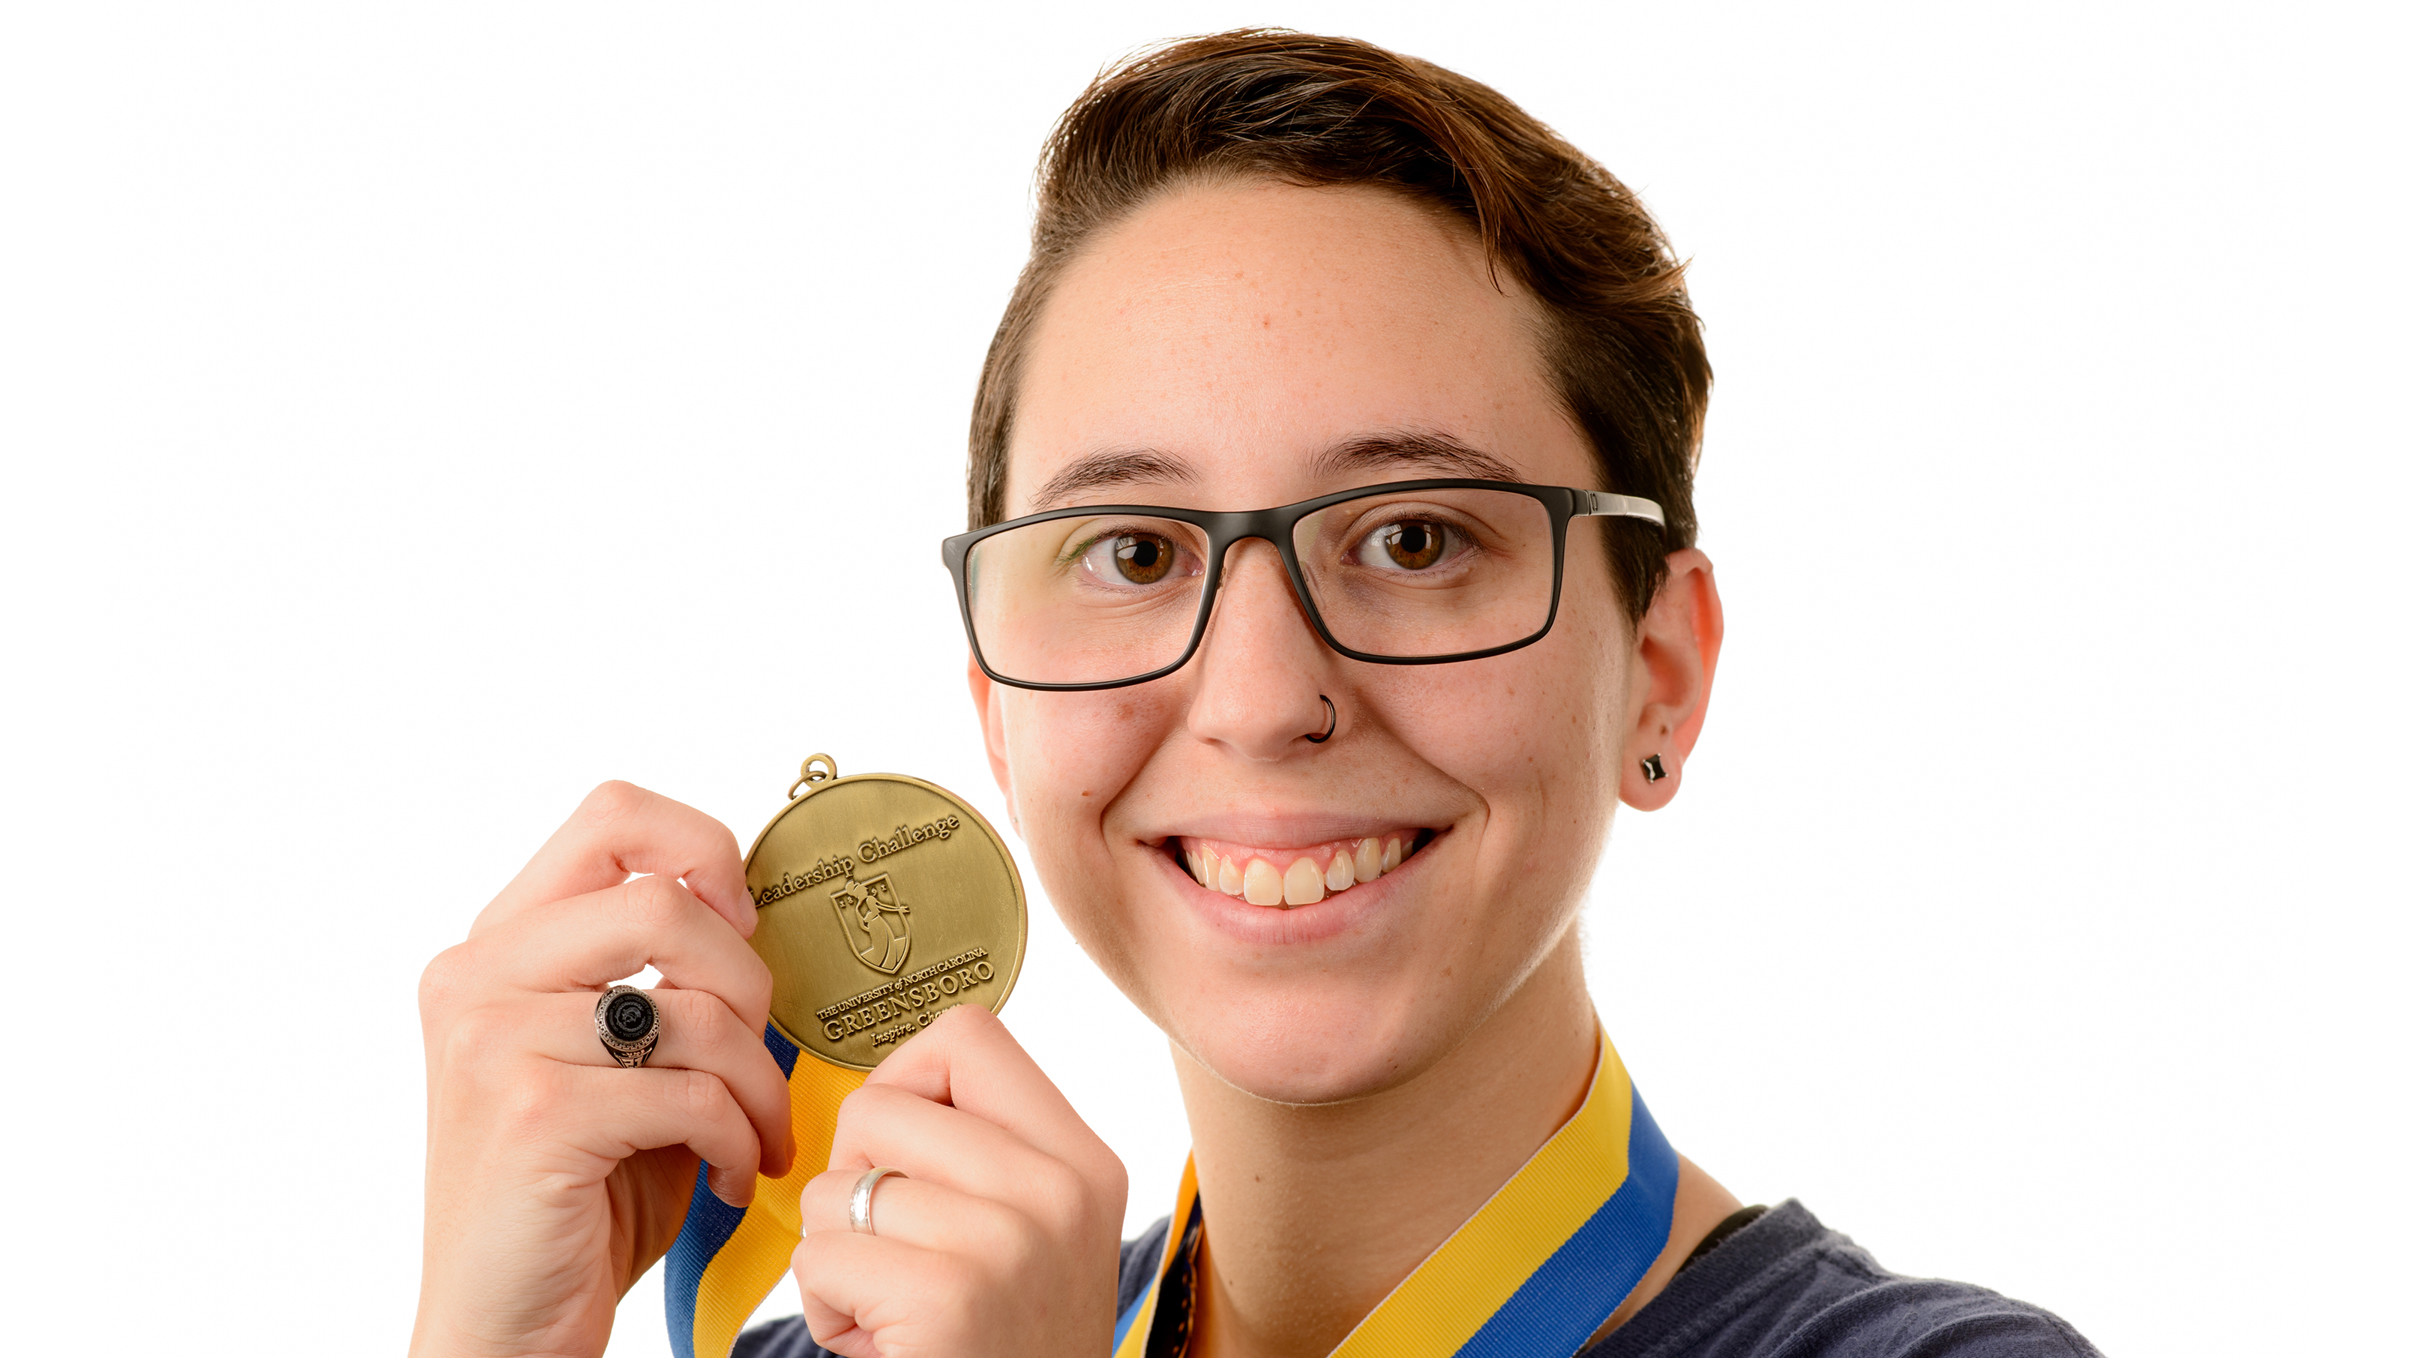 UNCG student Bri Ferraro poses for a portrait with her Leadership Challenge medal.